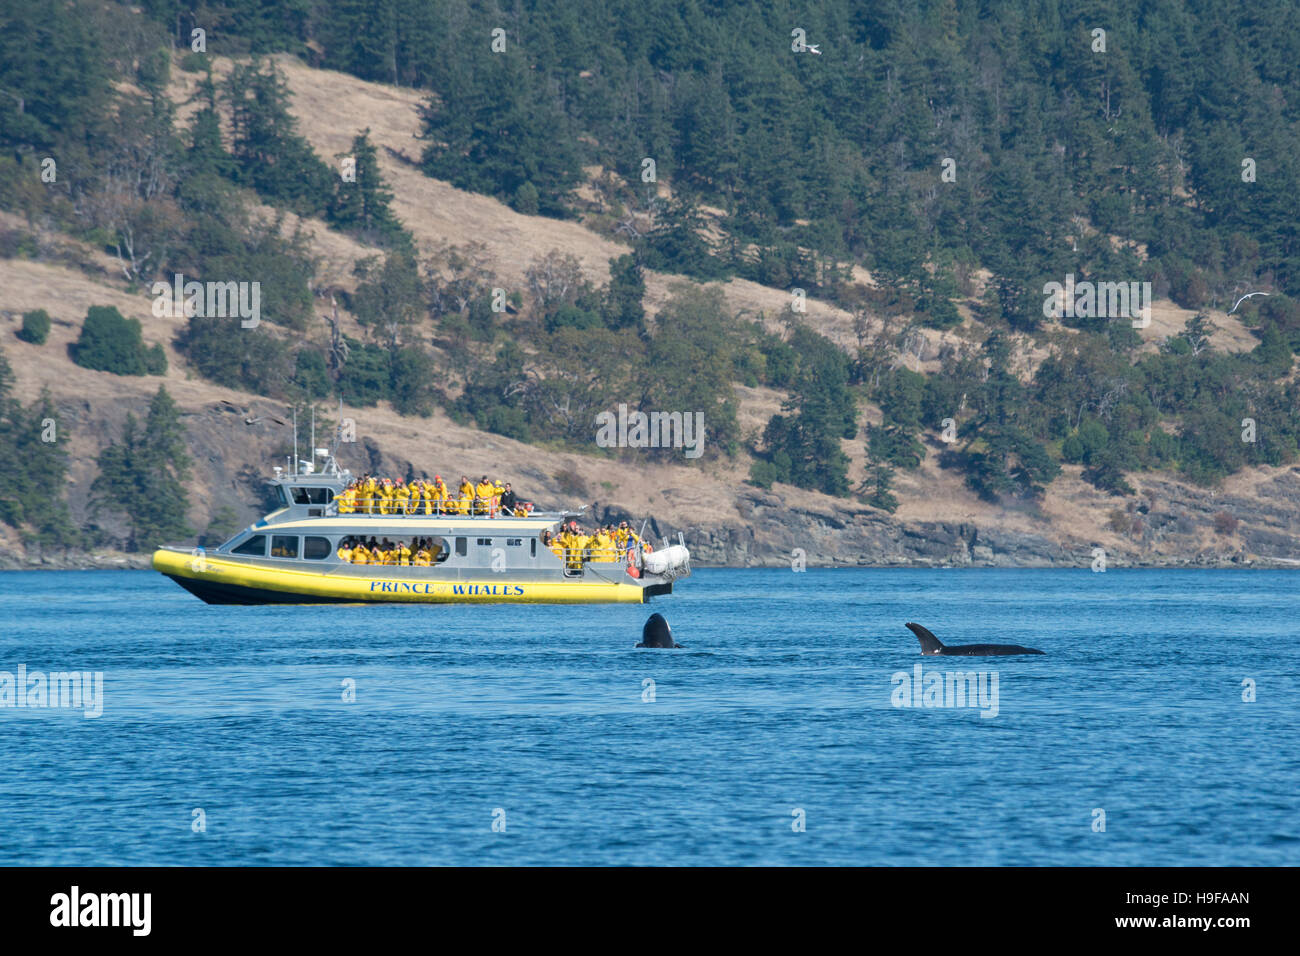 transient orcas or killer whales, Orcinus orca, surface next to a whale-watching boat, San Juan Islands, Washington, United States; Editorial use only Stock Photo